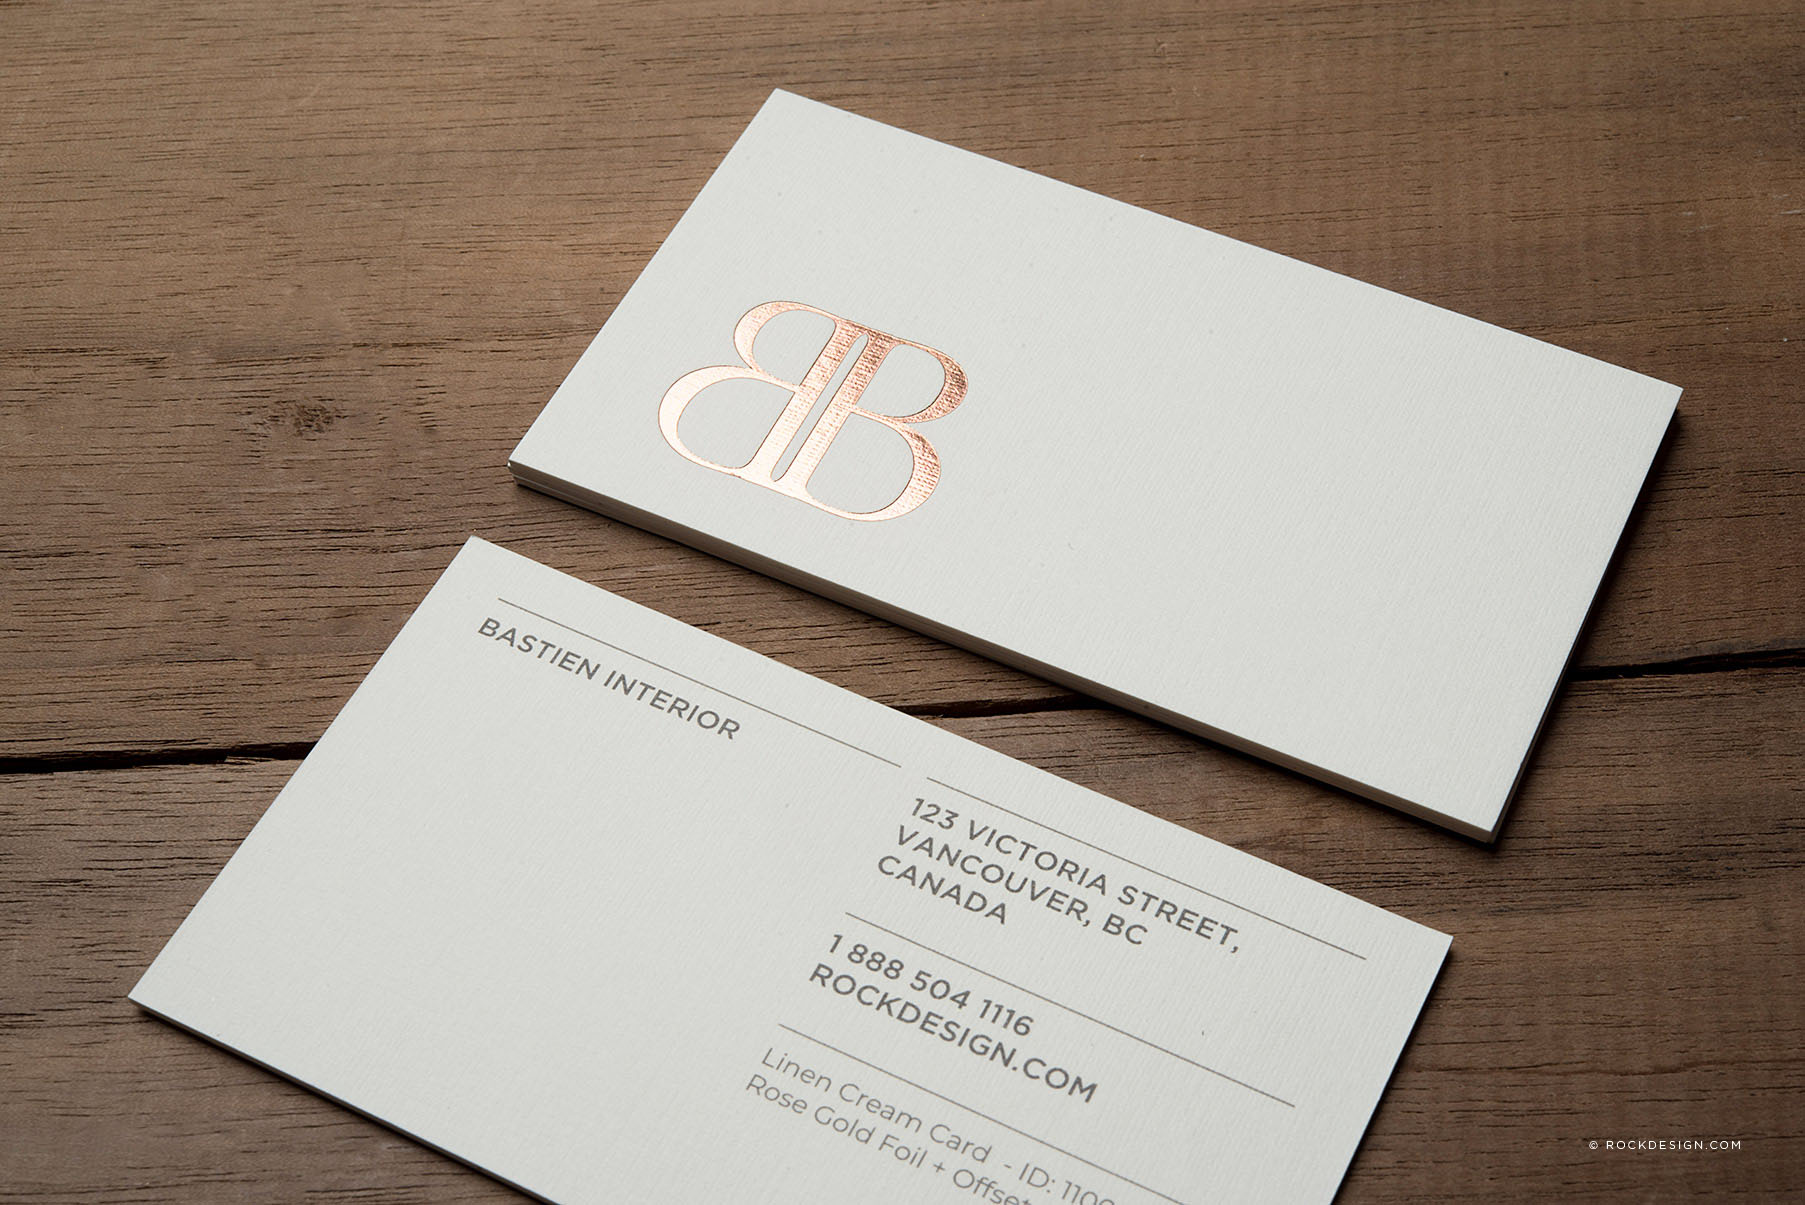 Business Cards 65 Lb. Smooth or Linen Finish